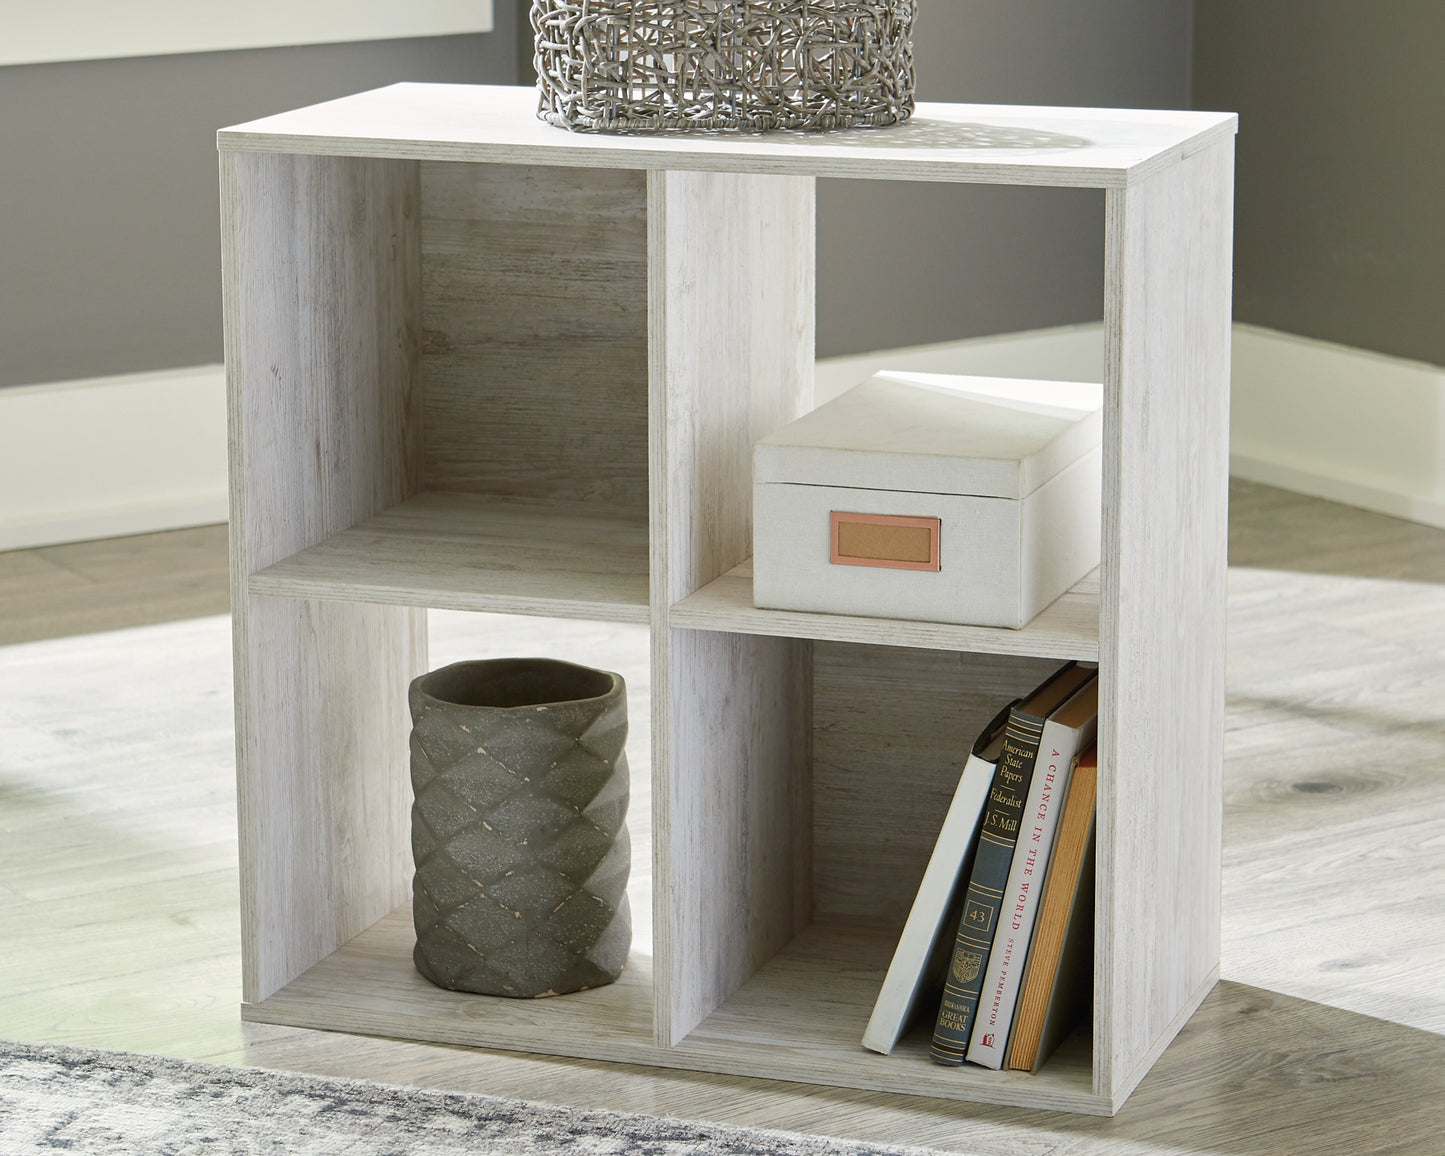 Paxberry Four Cube Organizer JB's Furniture Furniture, Bedroom, Accessories